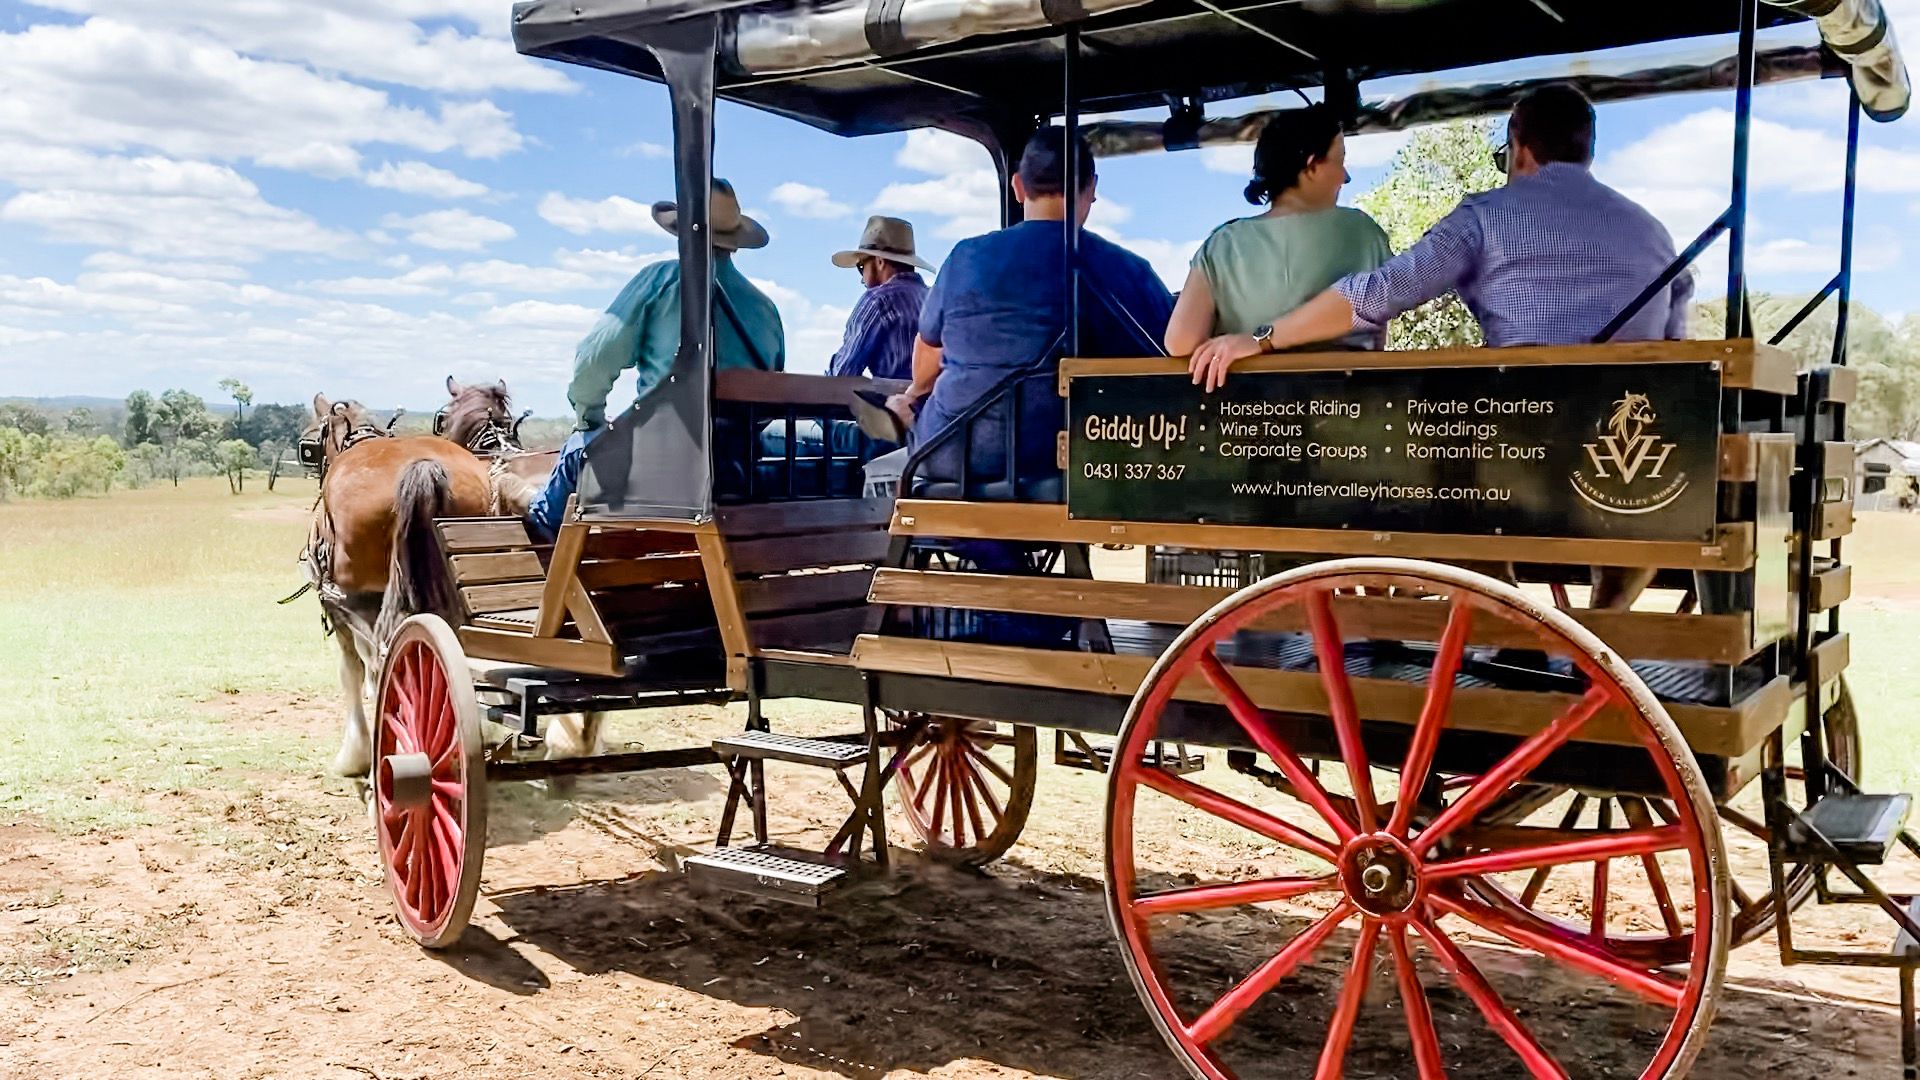 Hunter Valley: Three-Hour Horse & Carriage Wine Tour with Wine & Produce Tastings